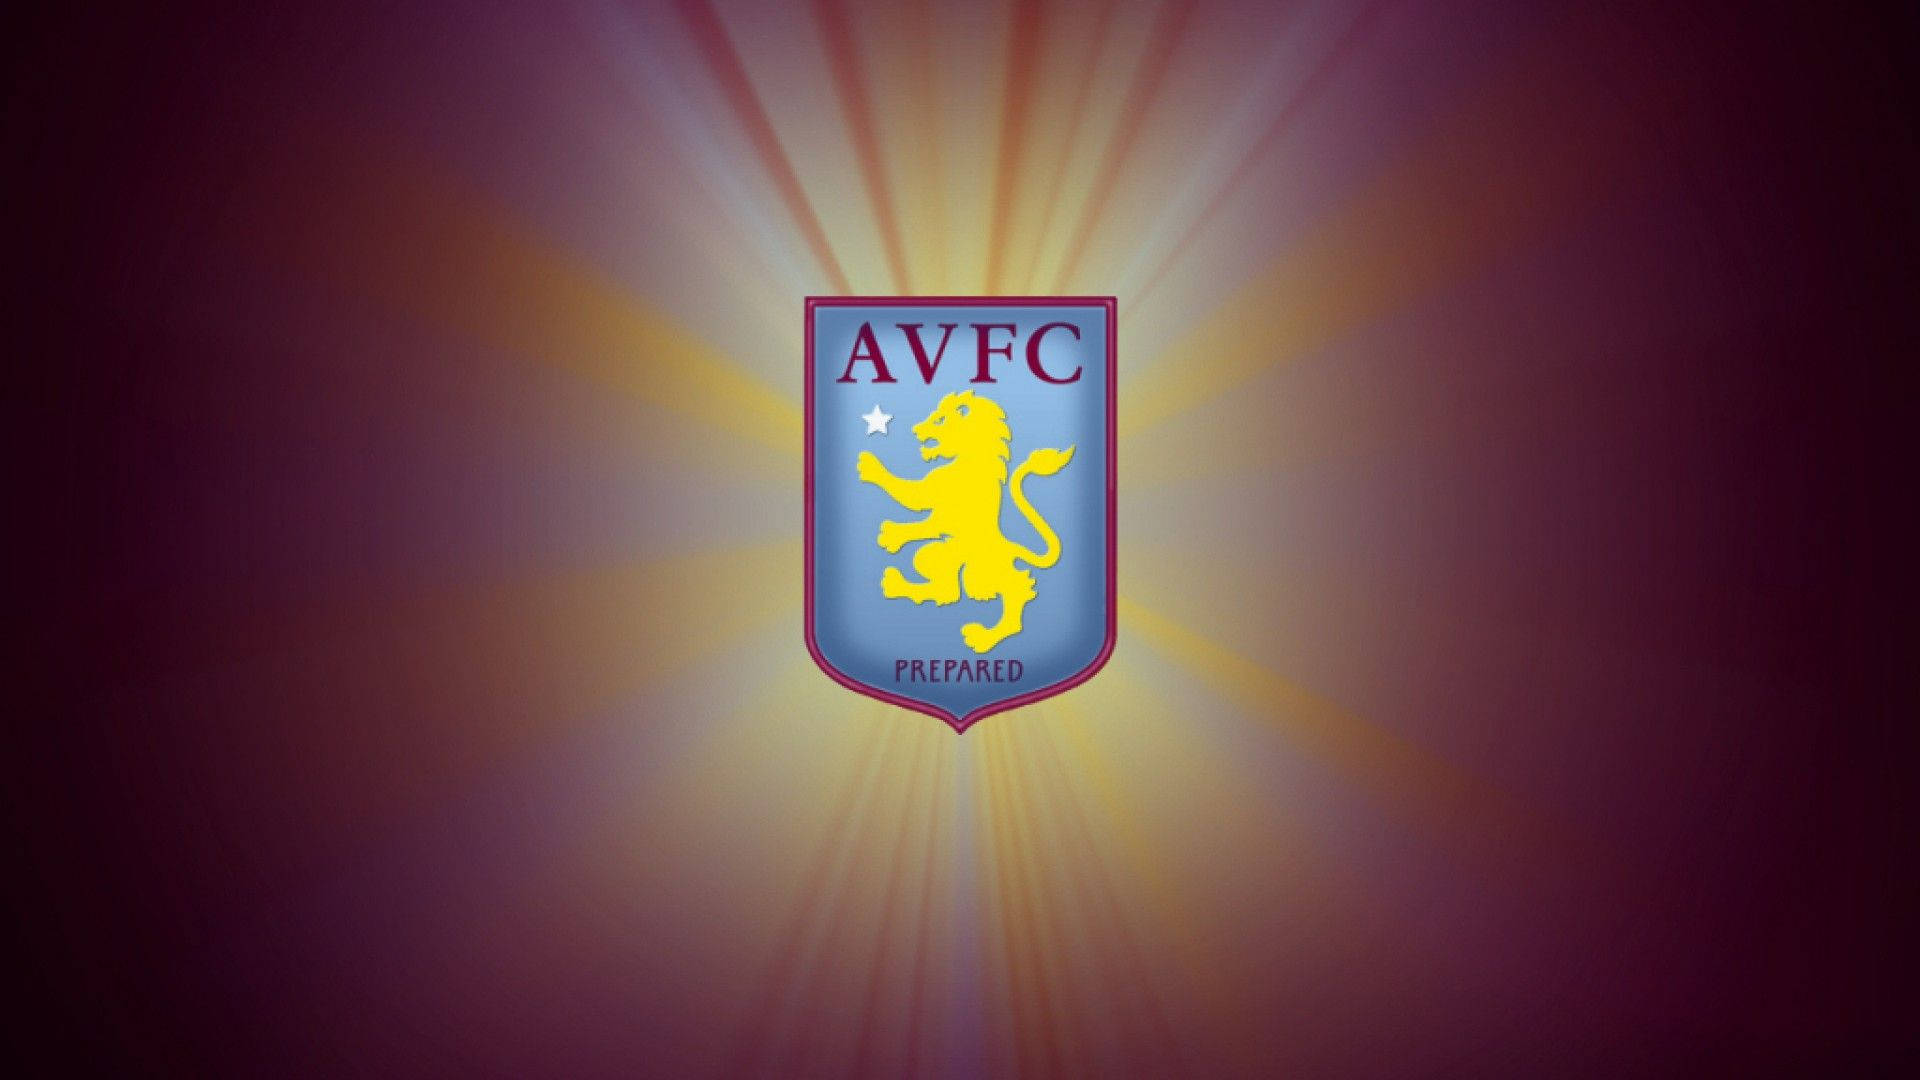 - Blankpolerade Aston Villa Fc (more Accurate Translation, Implying A Shiny/glossy Look) Wallpaper